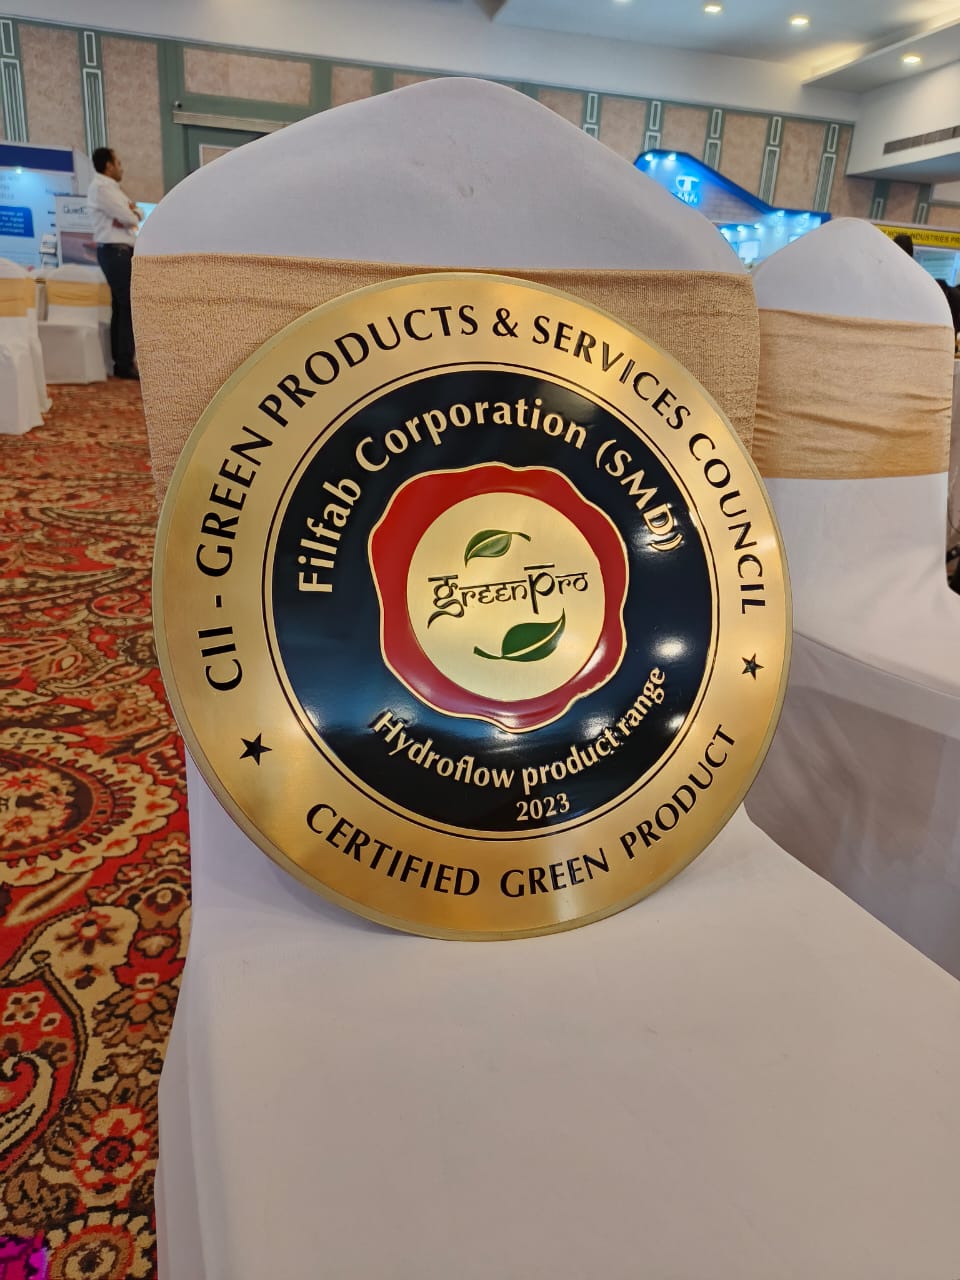 A round golden plaque with the words 'Filfab Corporation (SMD) - Hydroflow product range 2023' on it.